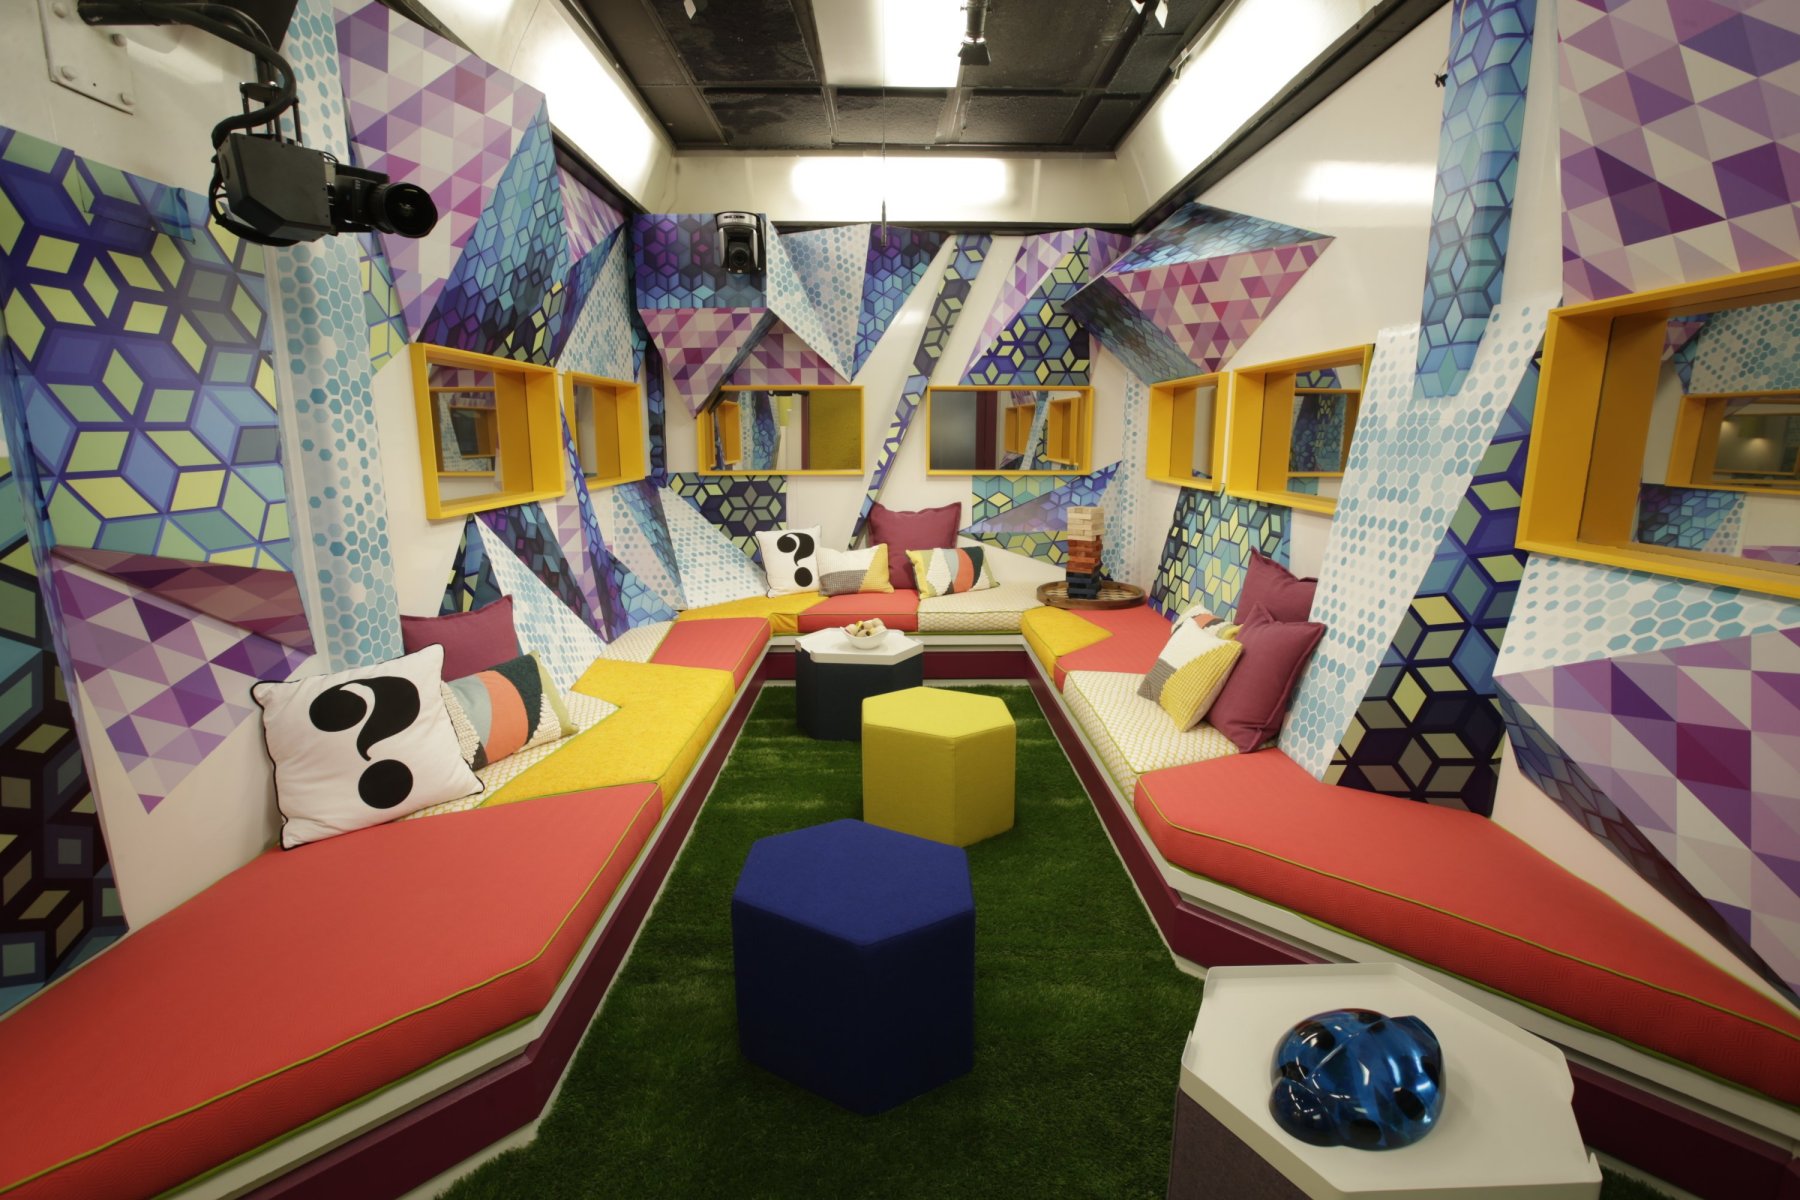 'Big Brother' Season 20 twist and house design revealed -- See the